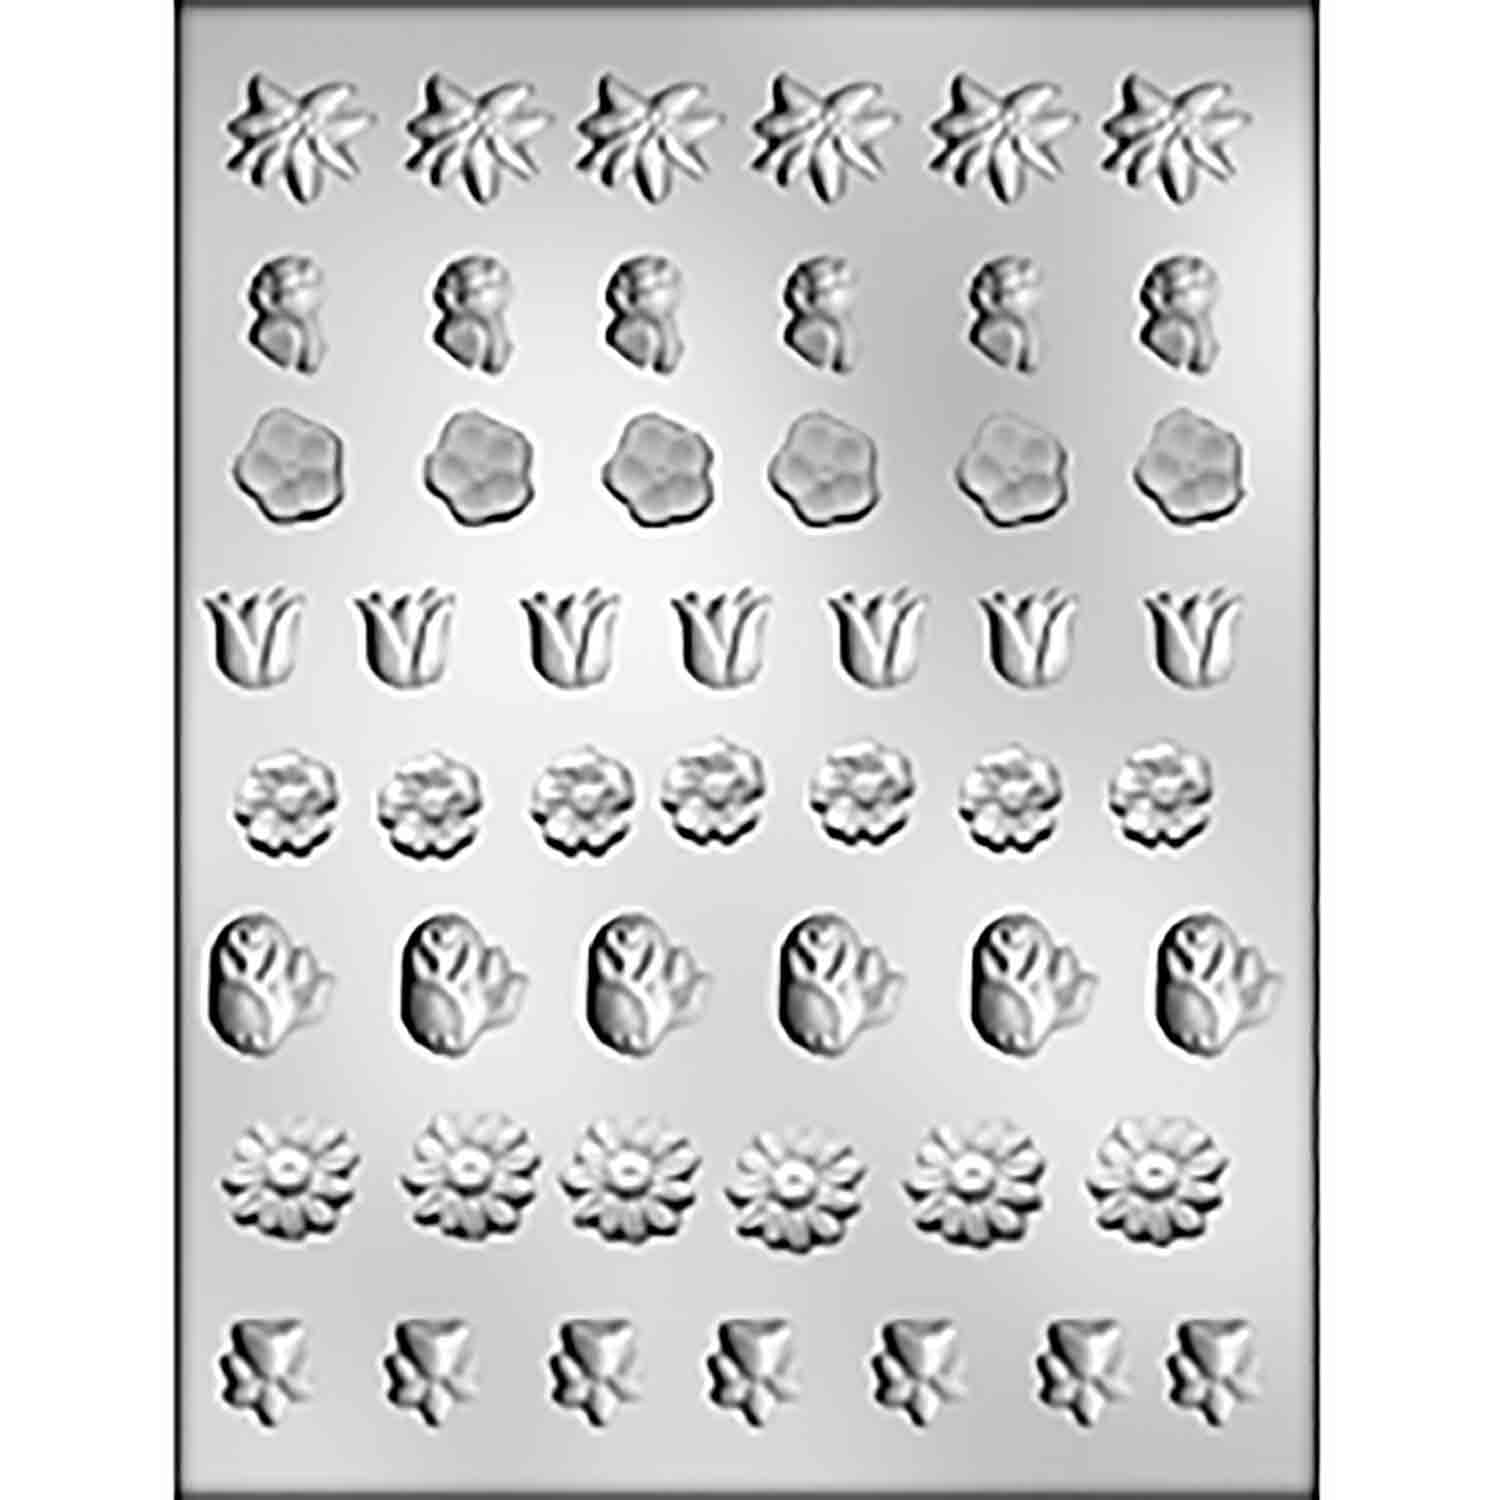 Flower Lay-Ons Chocolate Candy Mold